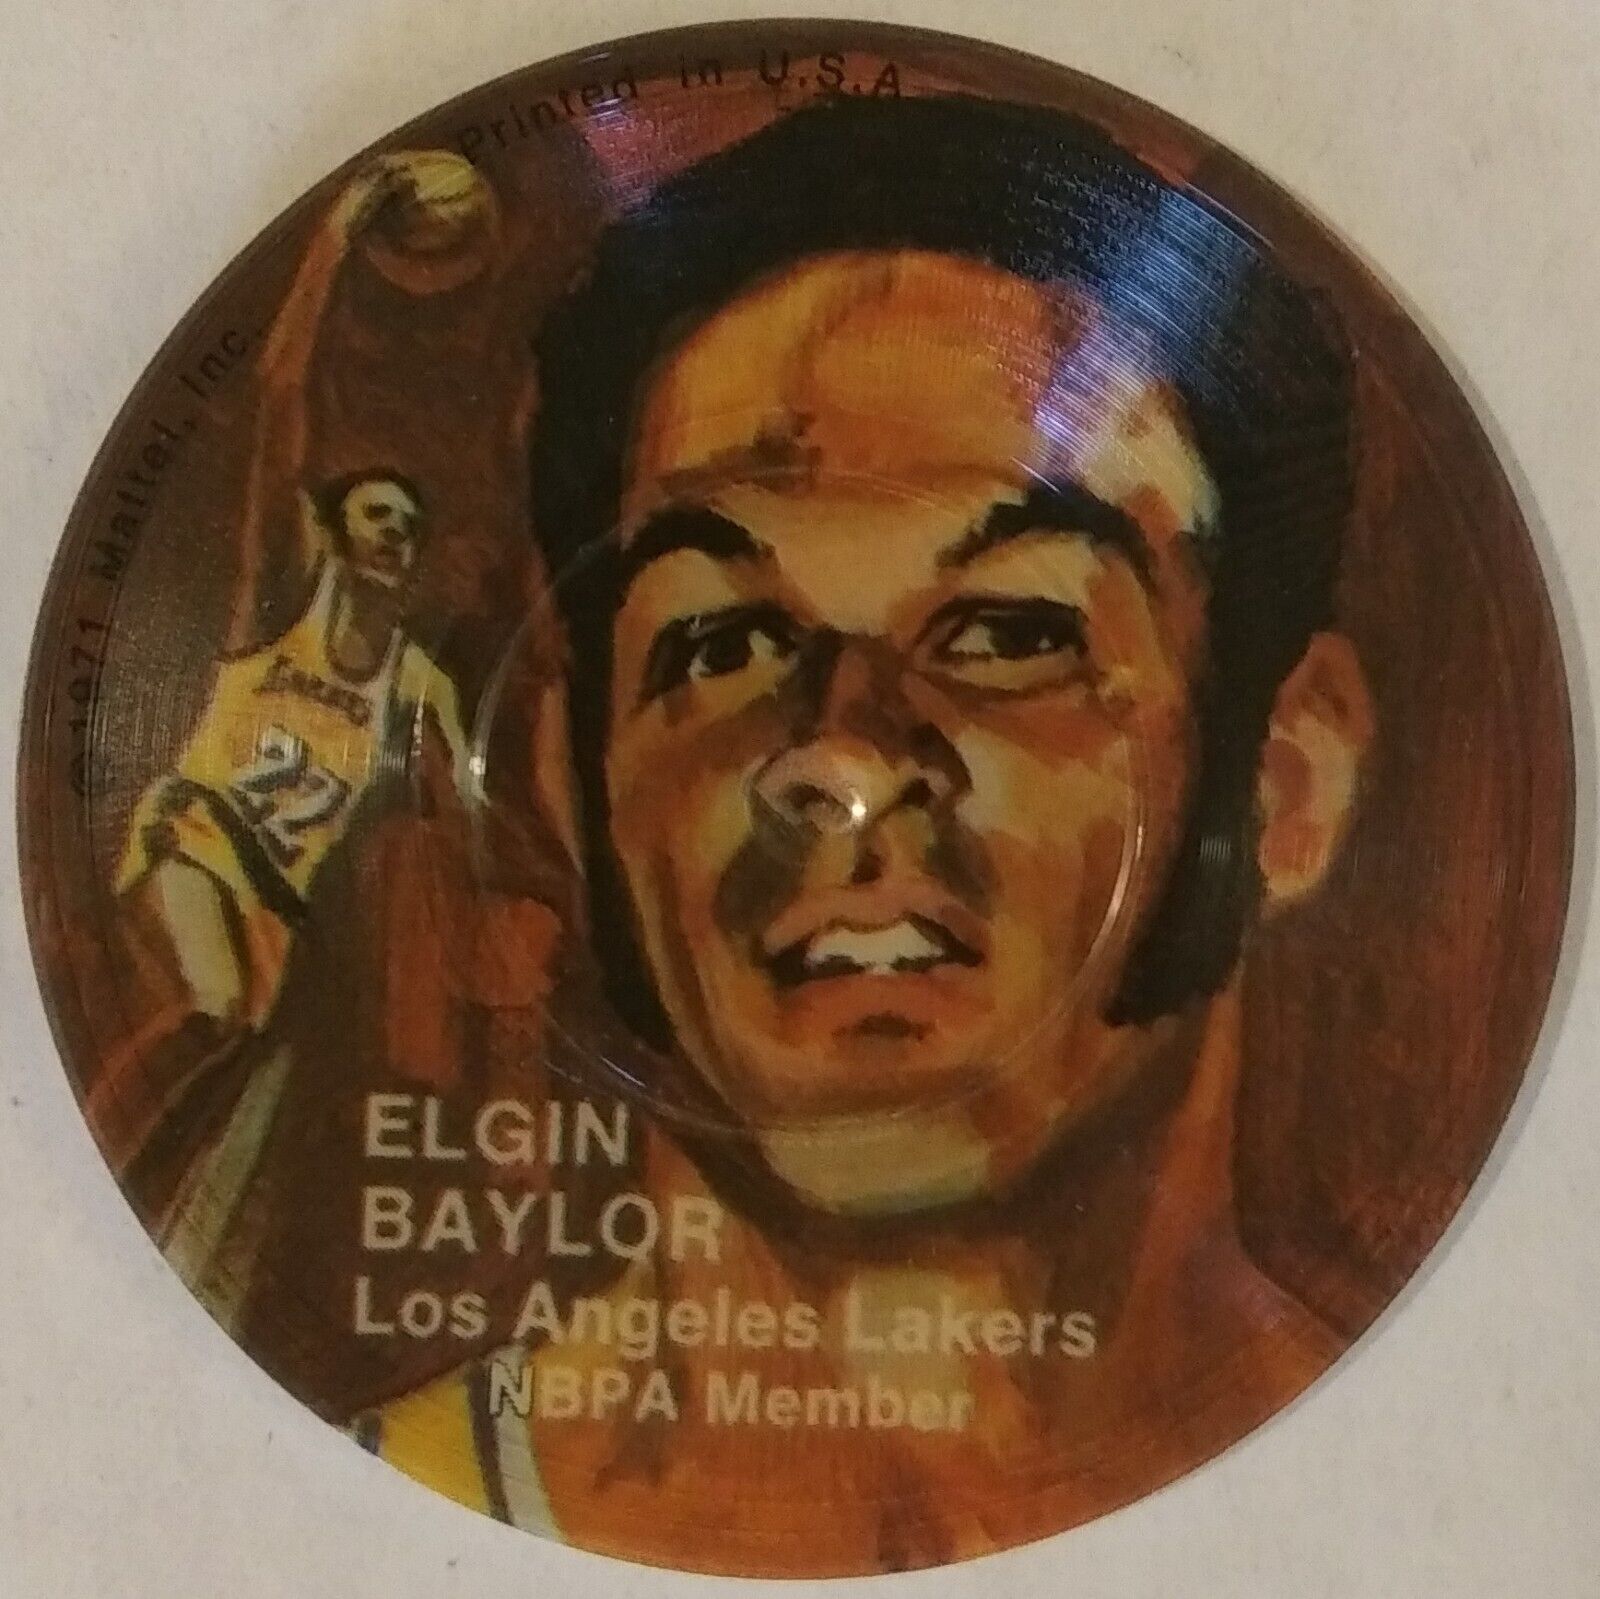 1971 Mattel Instant Replay ELGIN BAYLOR Double-Sided Mini Record - UNPLAYED